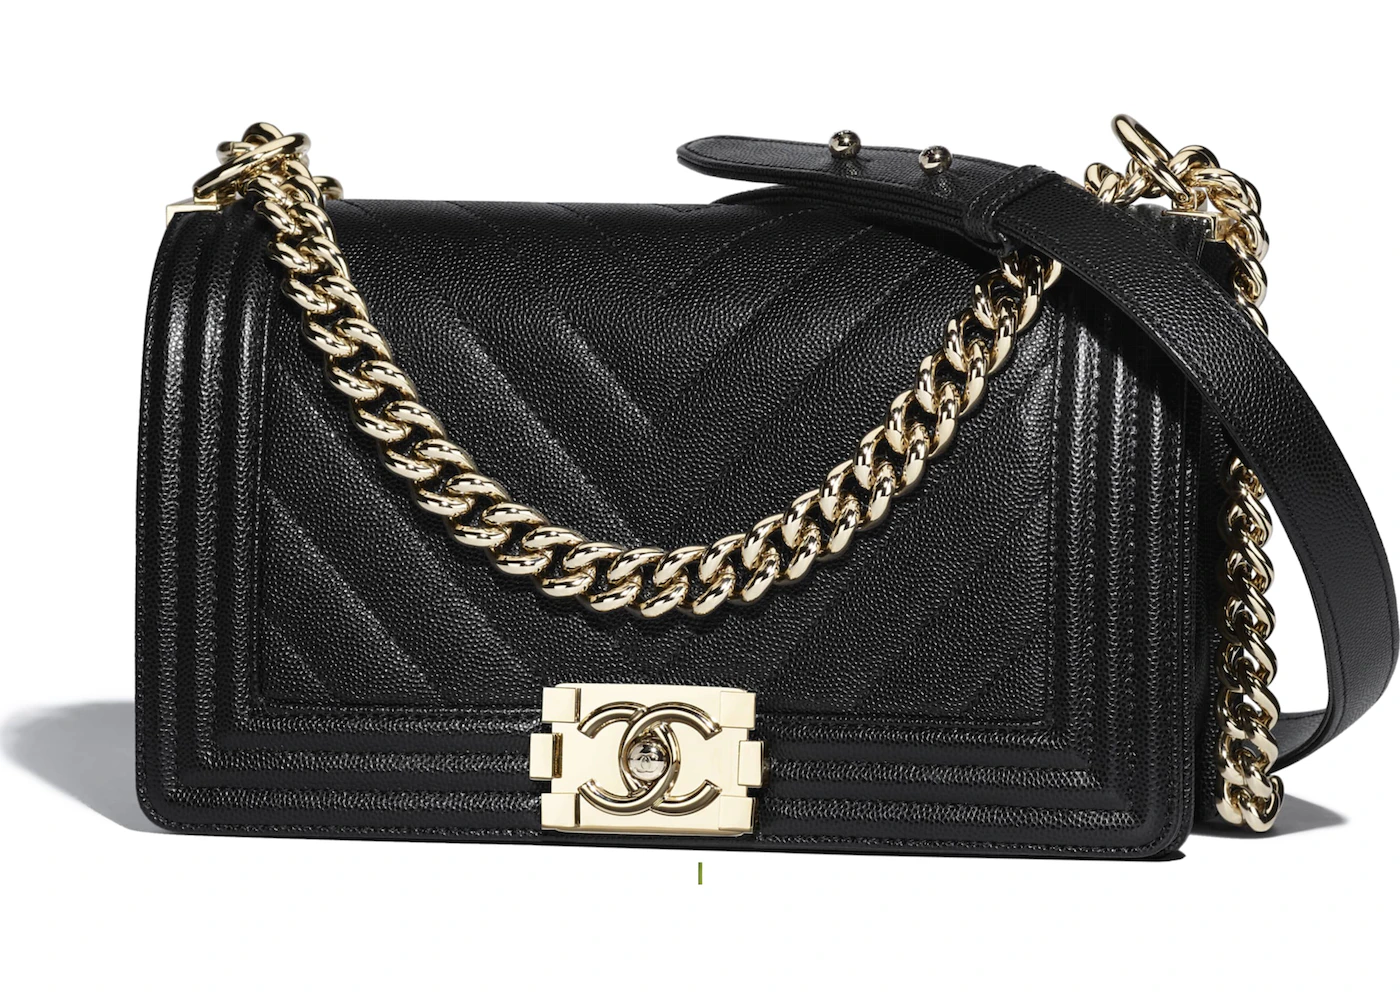 Watch and listen to see why this Chanel Black Grained Calfskin